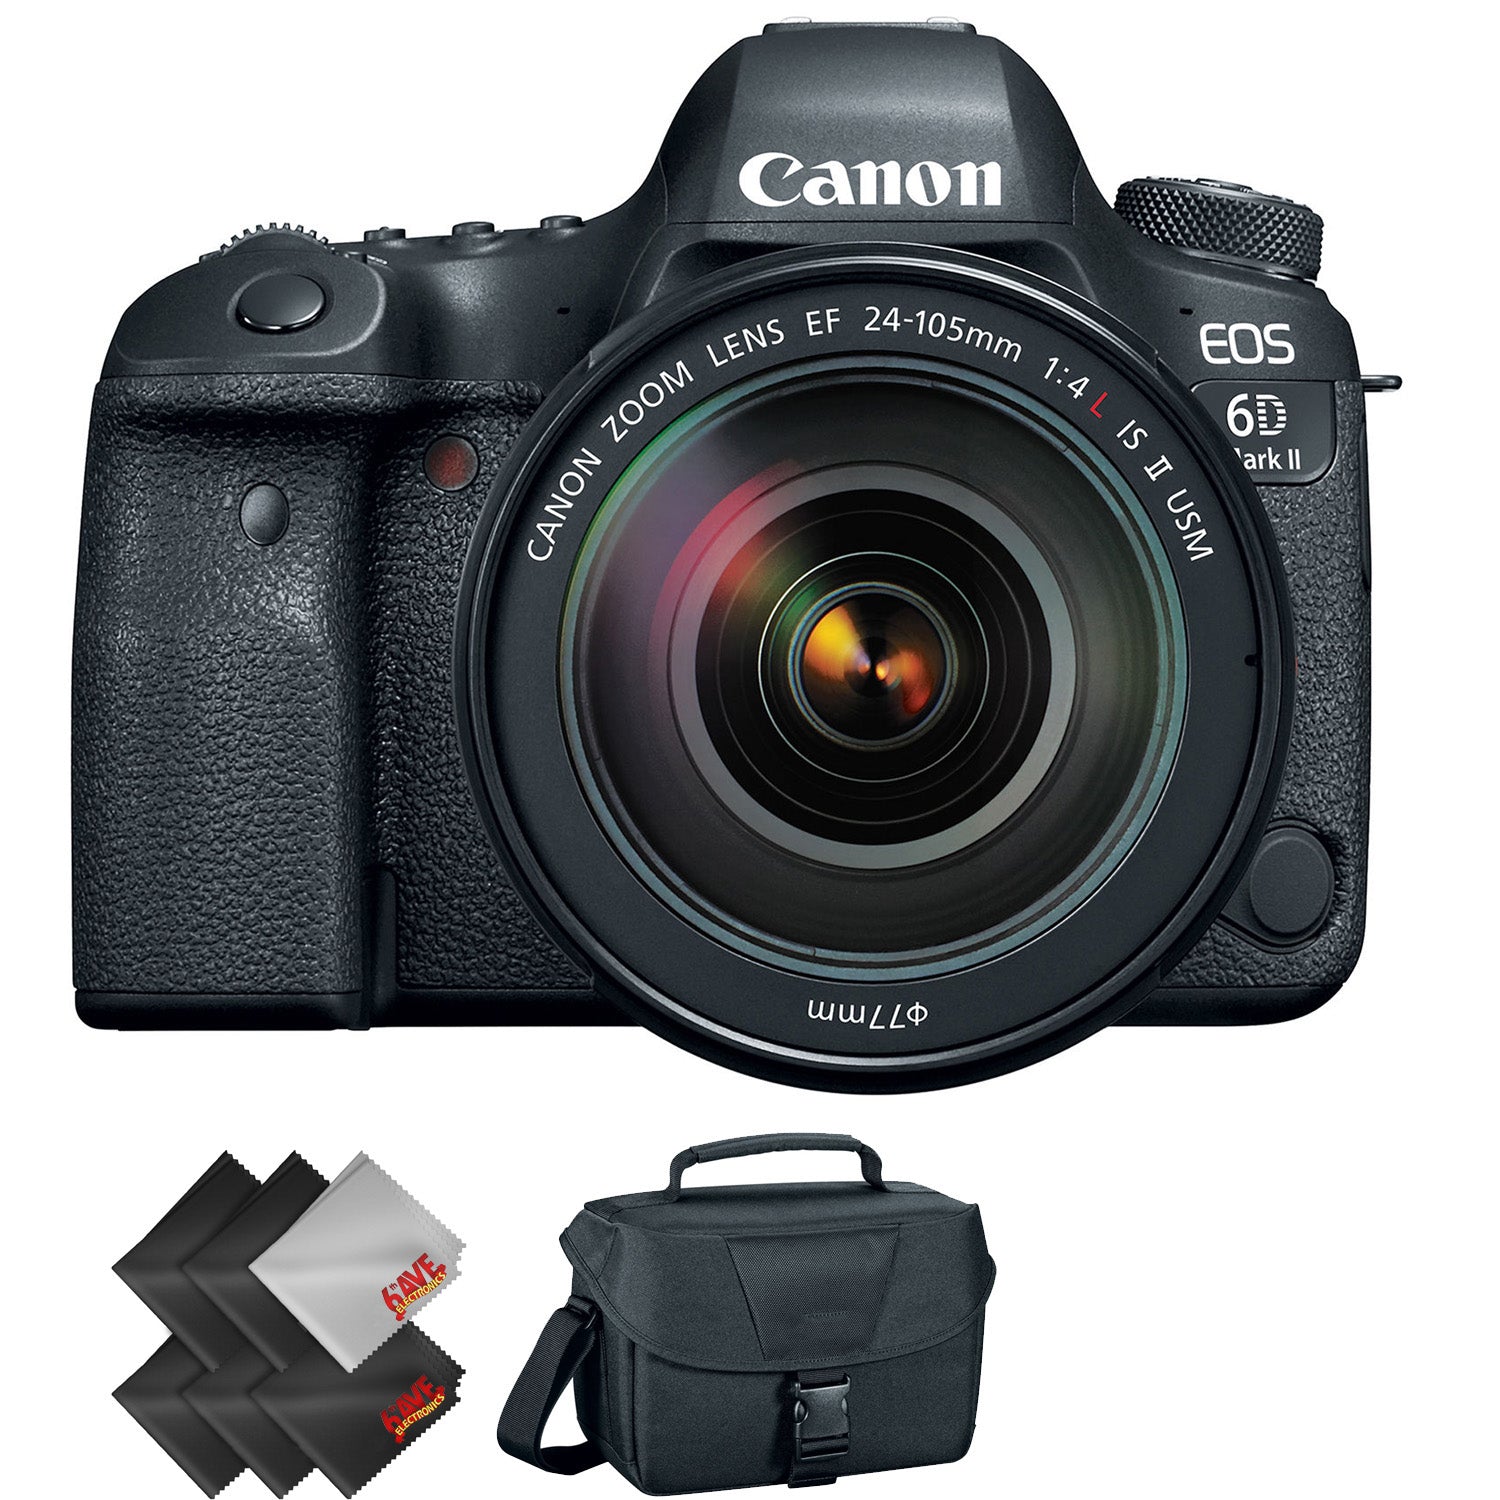 Canon EOS 6D Mark II DSLR Camera with 24-105mm f/4L II Lens + 2 Year Accidental Warranty